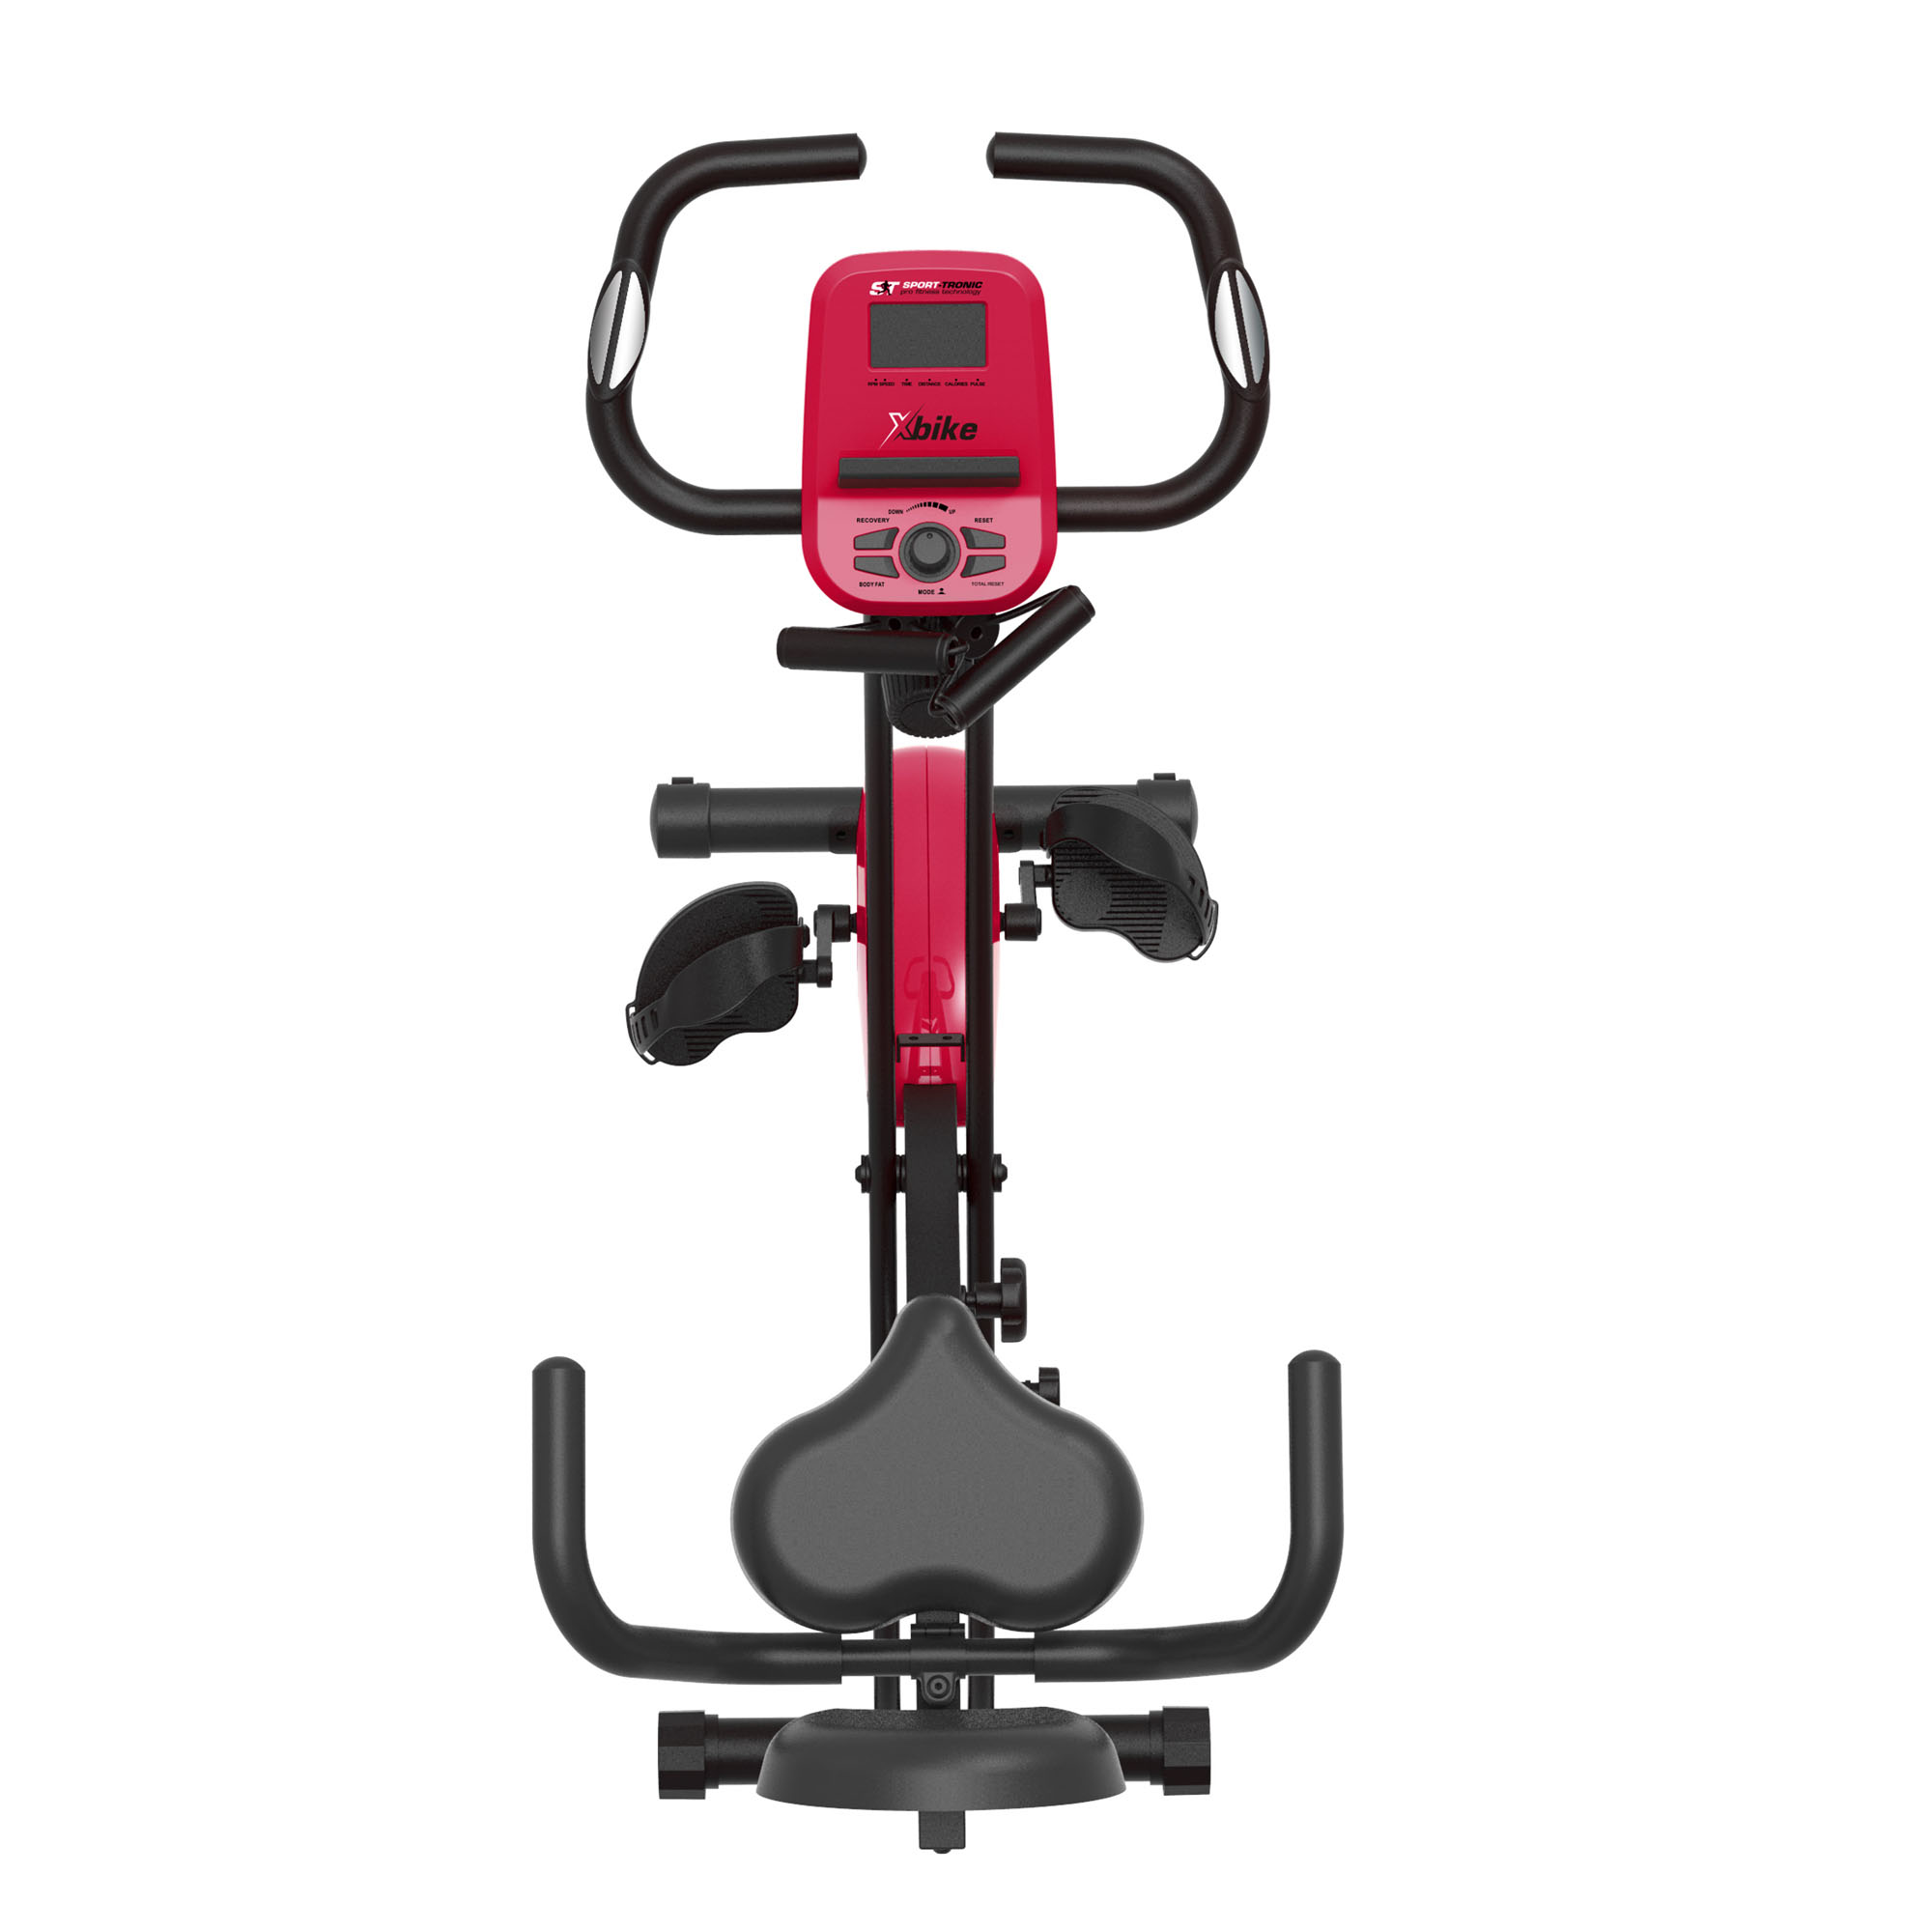 Red Fitnessbike, BY TURBOTRONIC Z-LINE ST-X6-RED